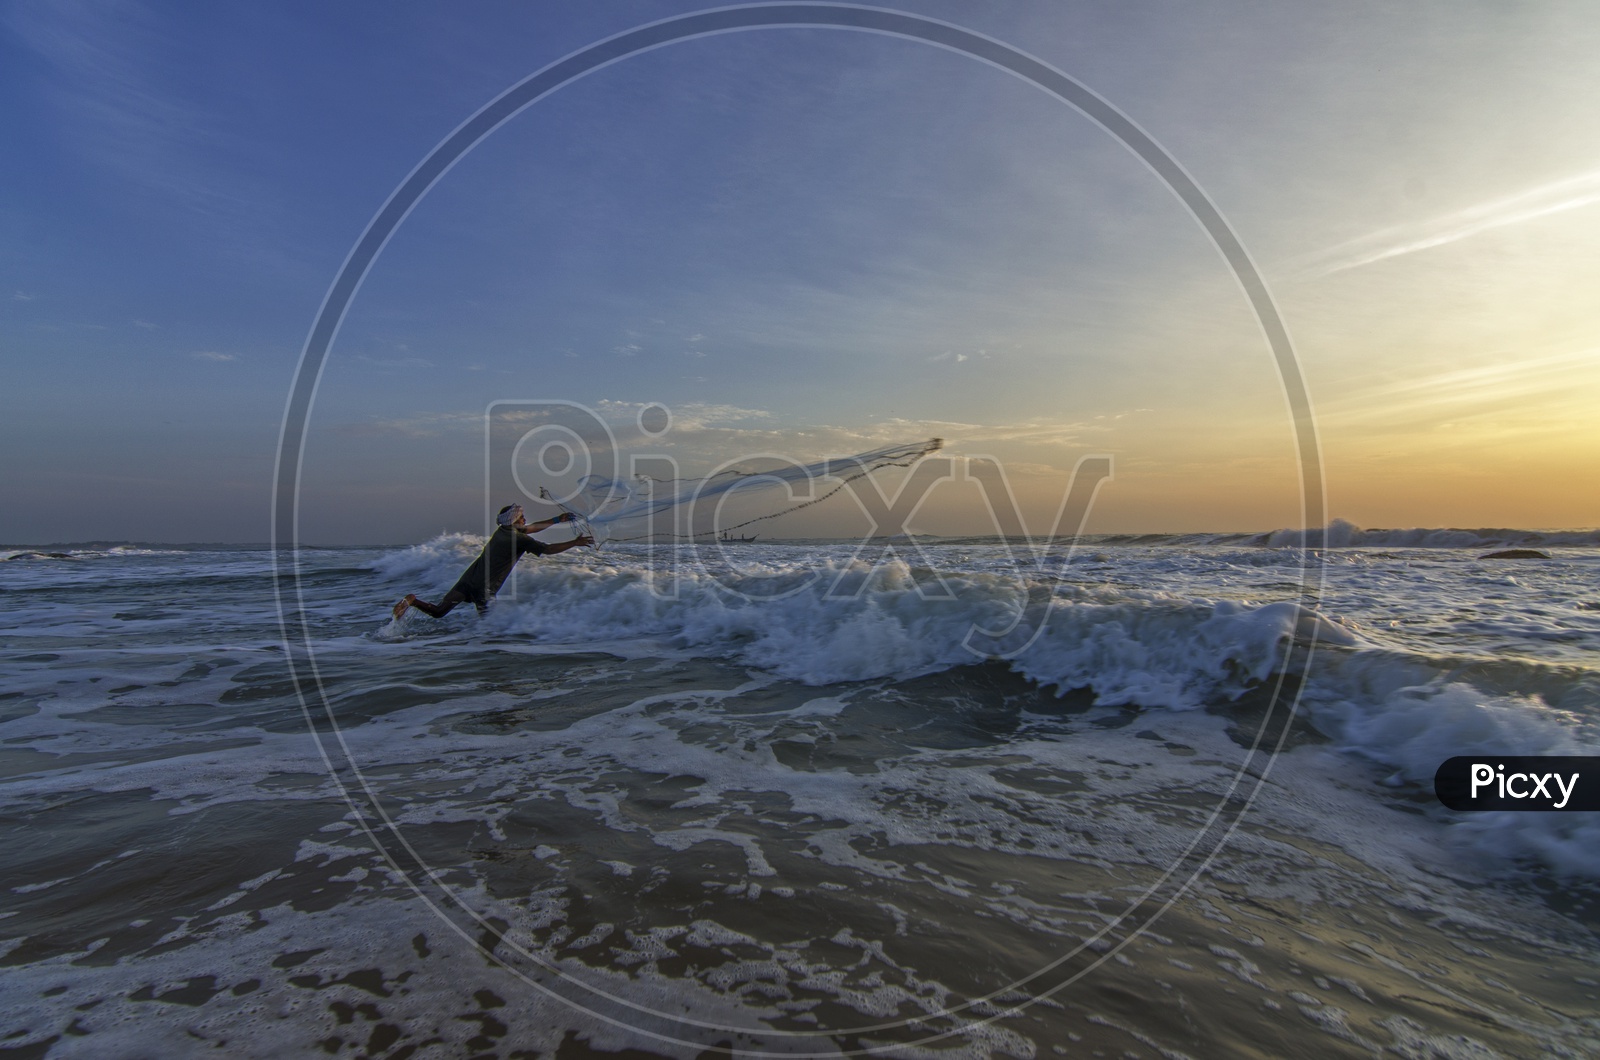 Fisherman spreading the net at dawn in the beach